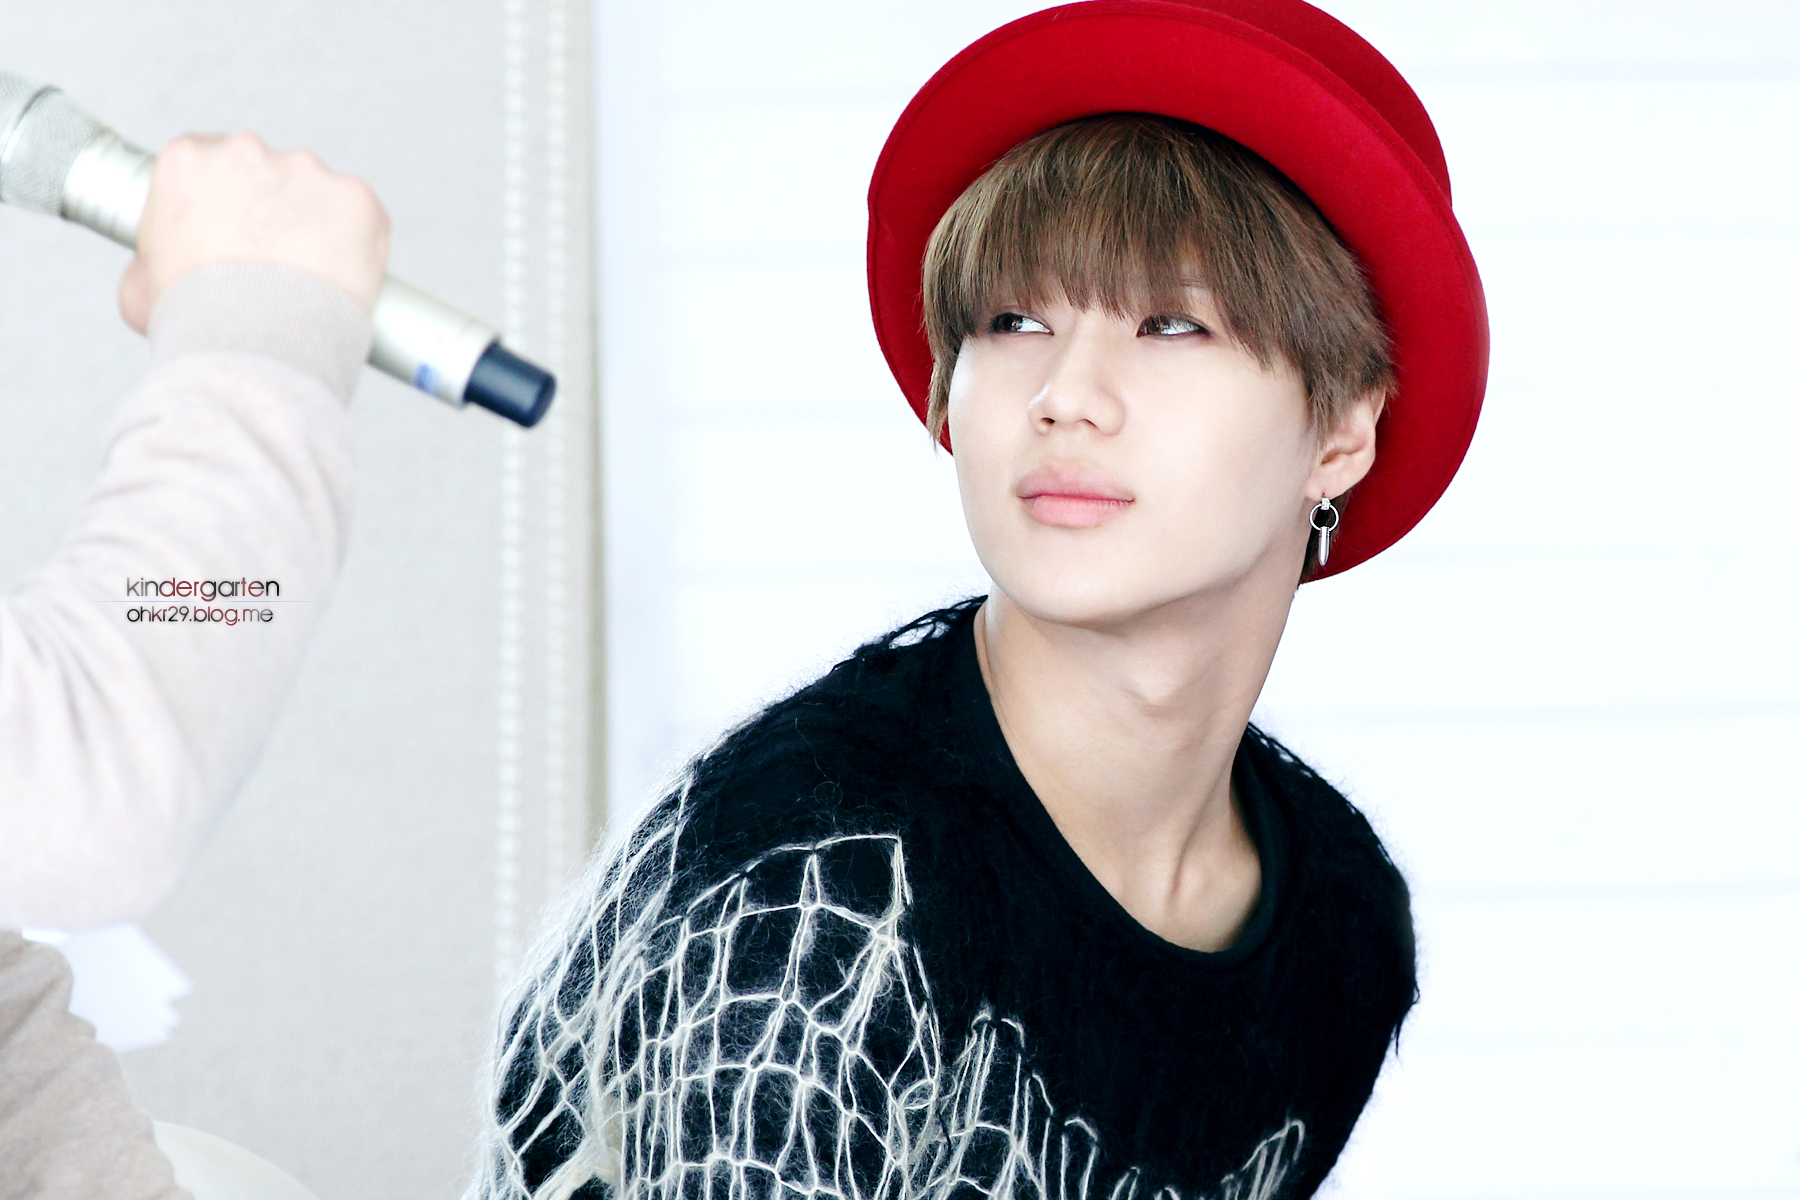 Lee Taemin images Taemin HD wallpaper and background